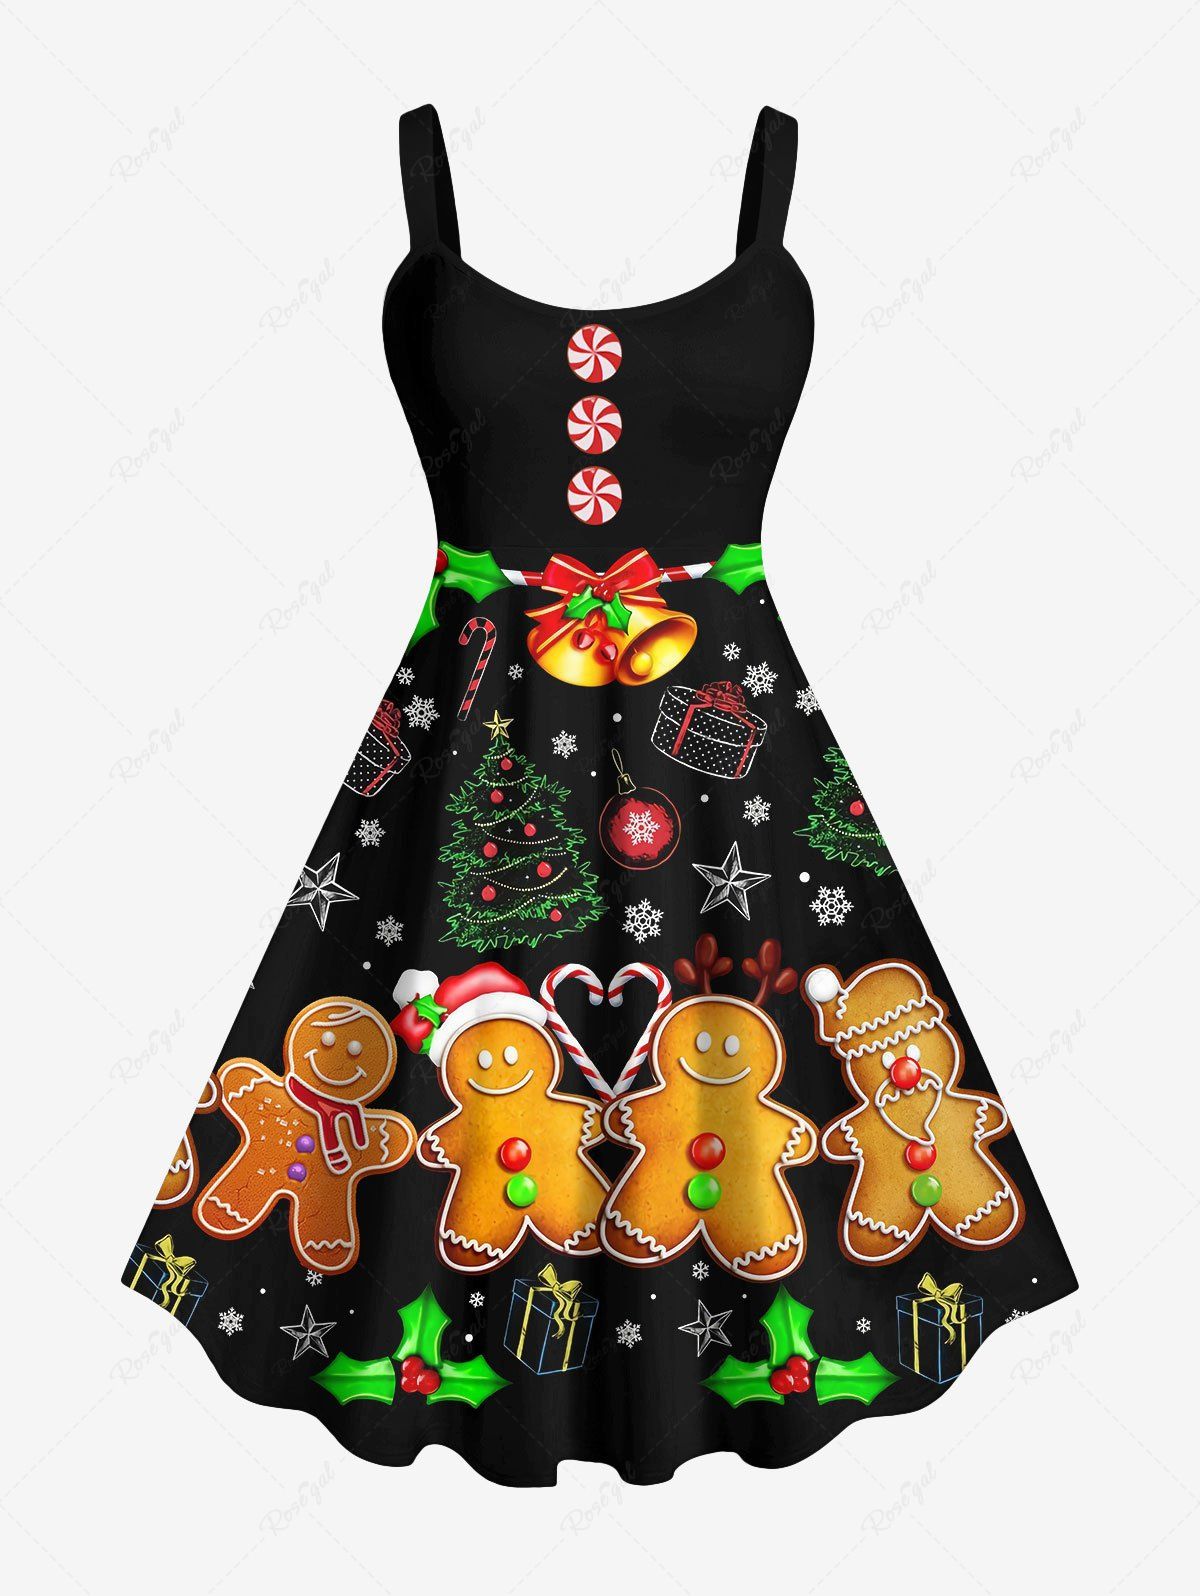 Hot Plus Size Christmas Tree Bell Gift Candy Star Snowflake Gingerbread Print Tank Dress  